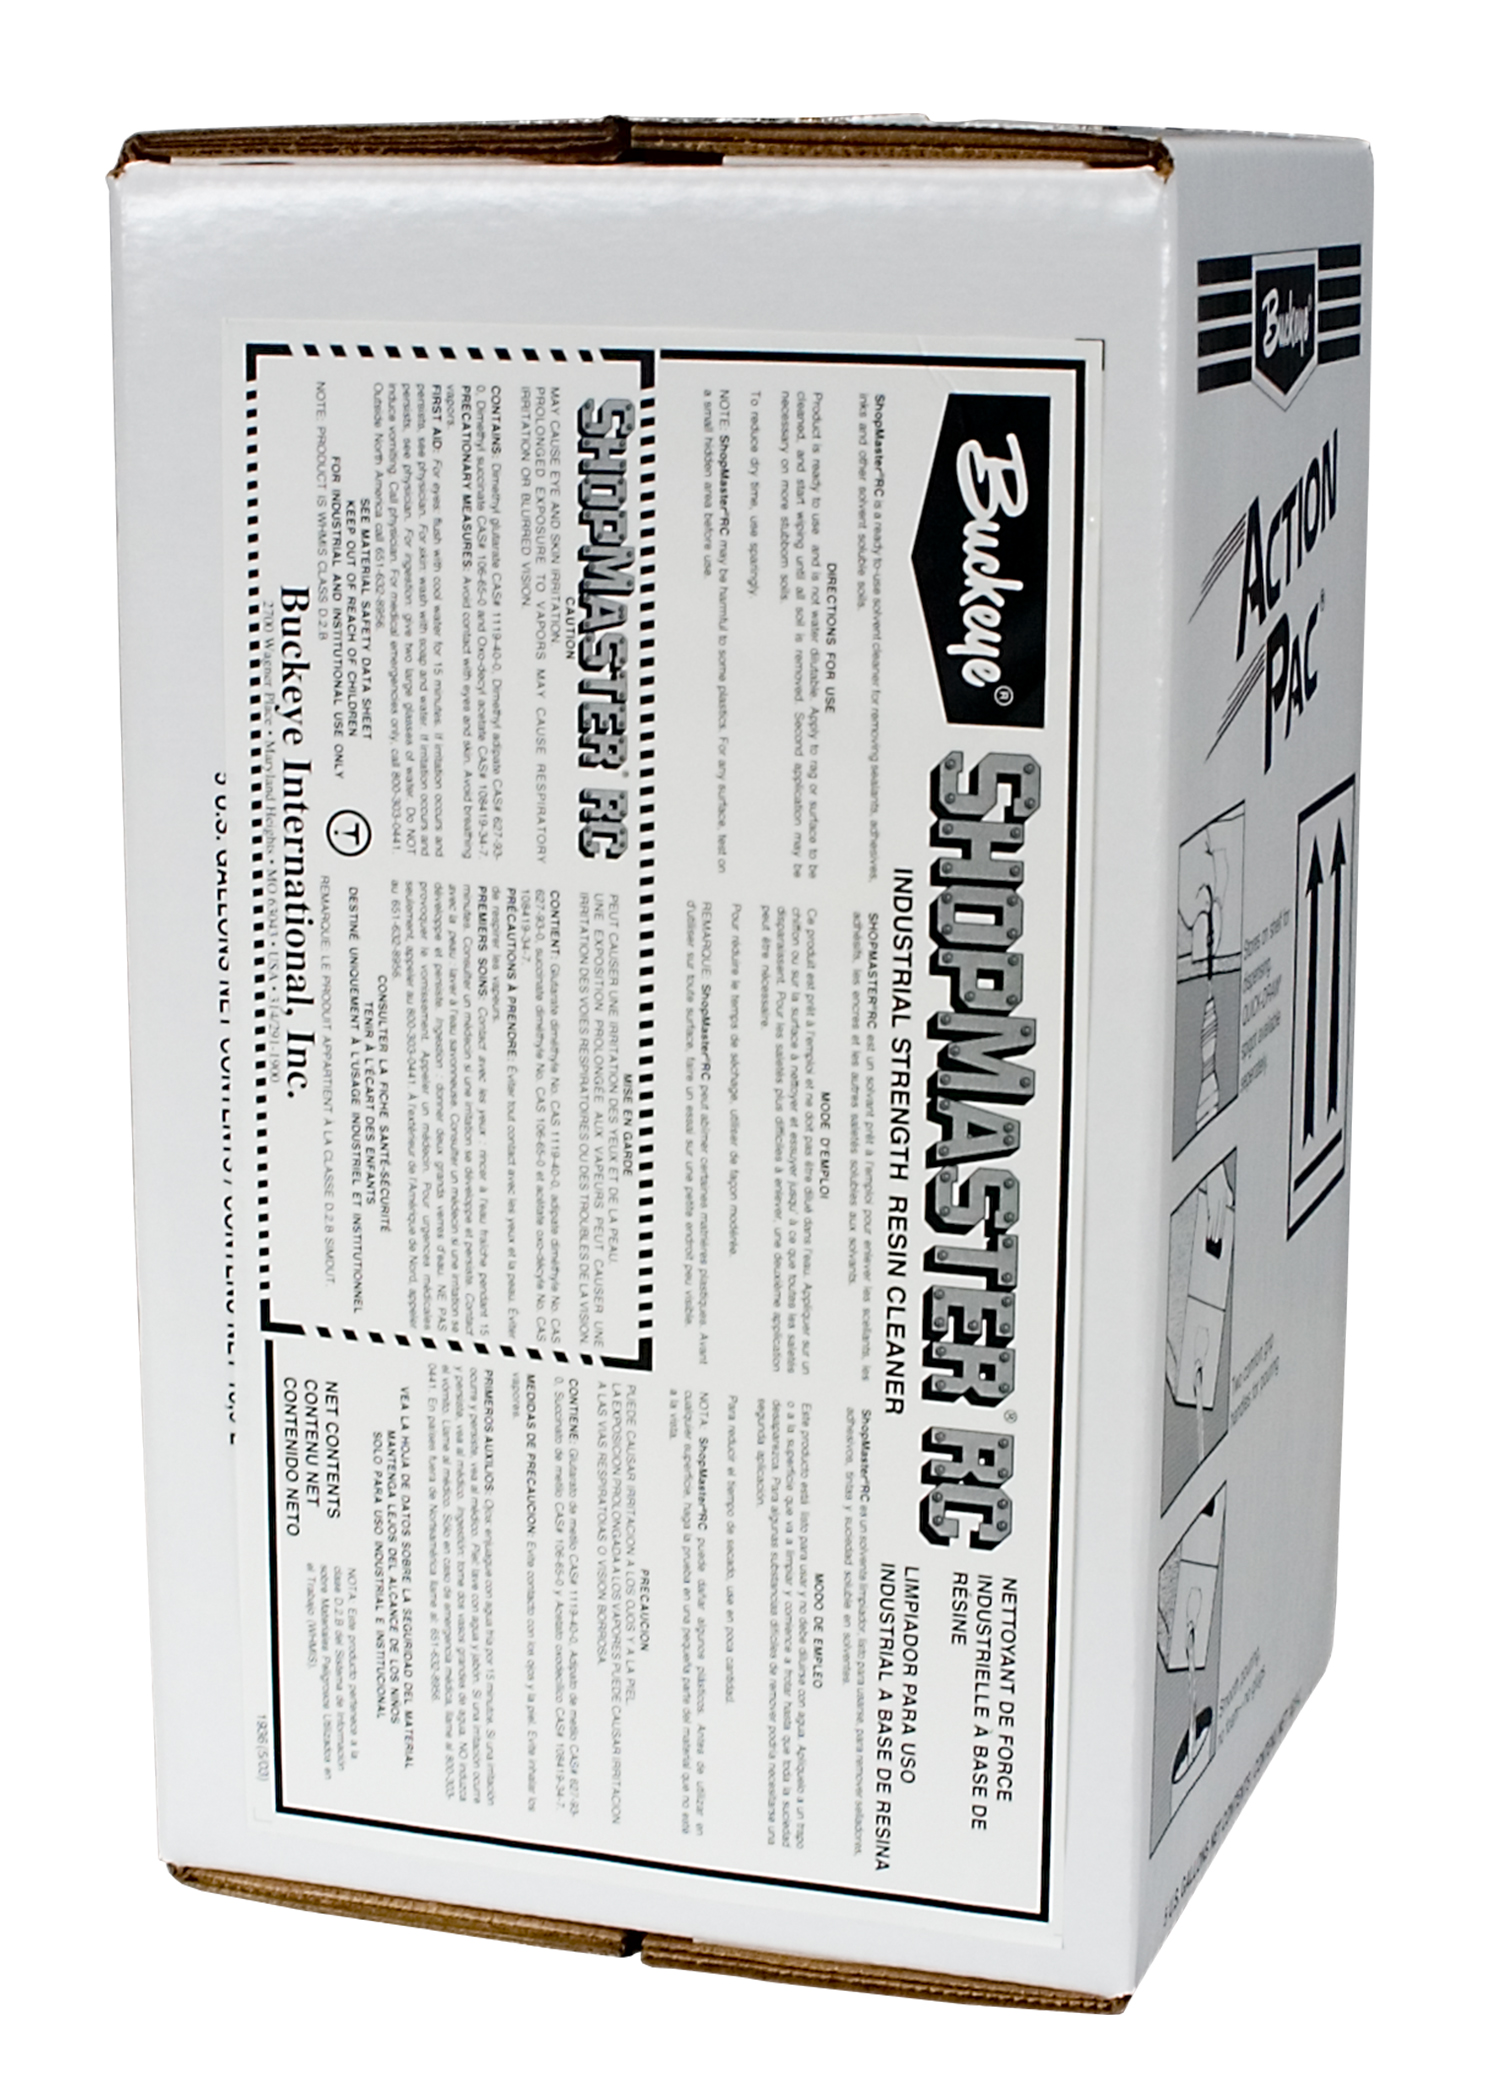 Buckeye Shopmaster RC 
Industrial Strength Resin 
Cleaner - 5 Gal. Action Pac